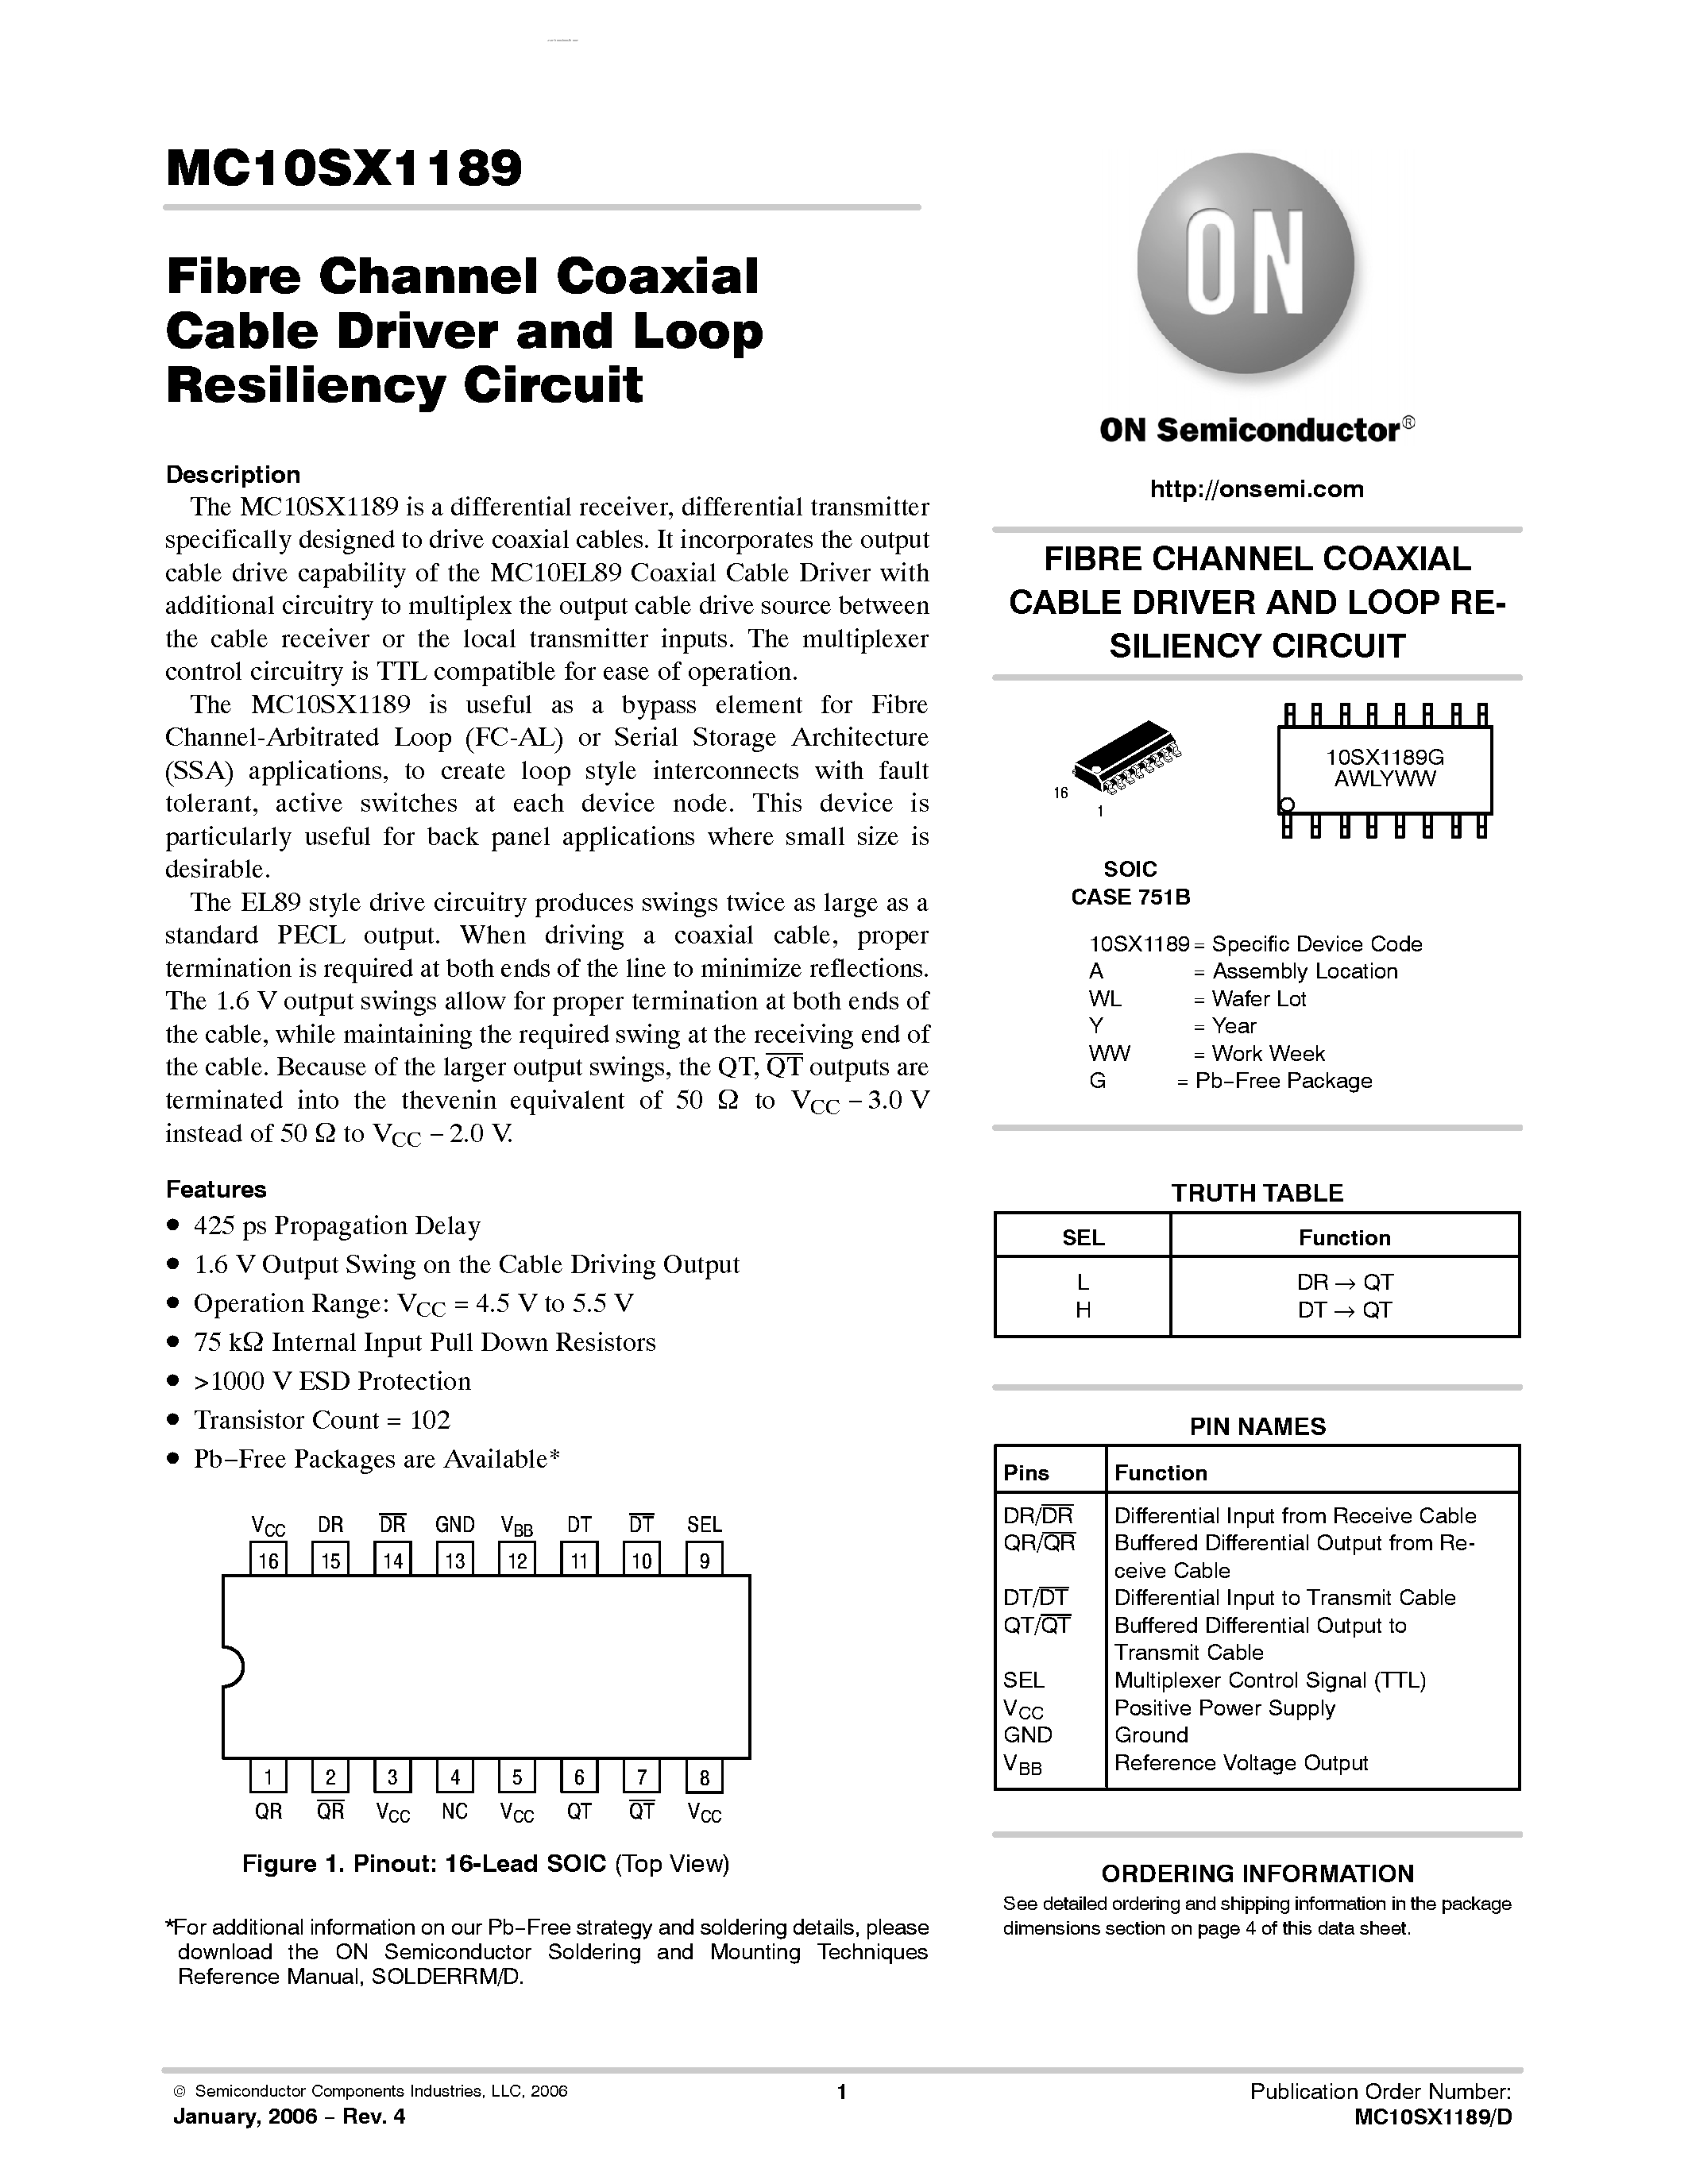 Datasheet MC10SX1189 - FIBRE CHANNEL COAXIAL CABLE DRIVER AND LOOP RESILIENCY CIRCUIT page 1